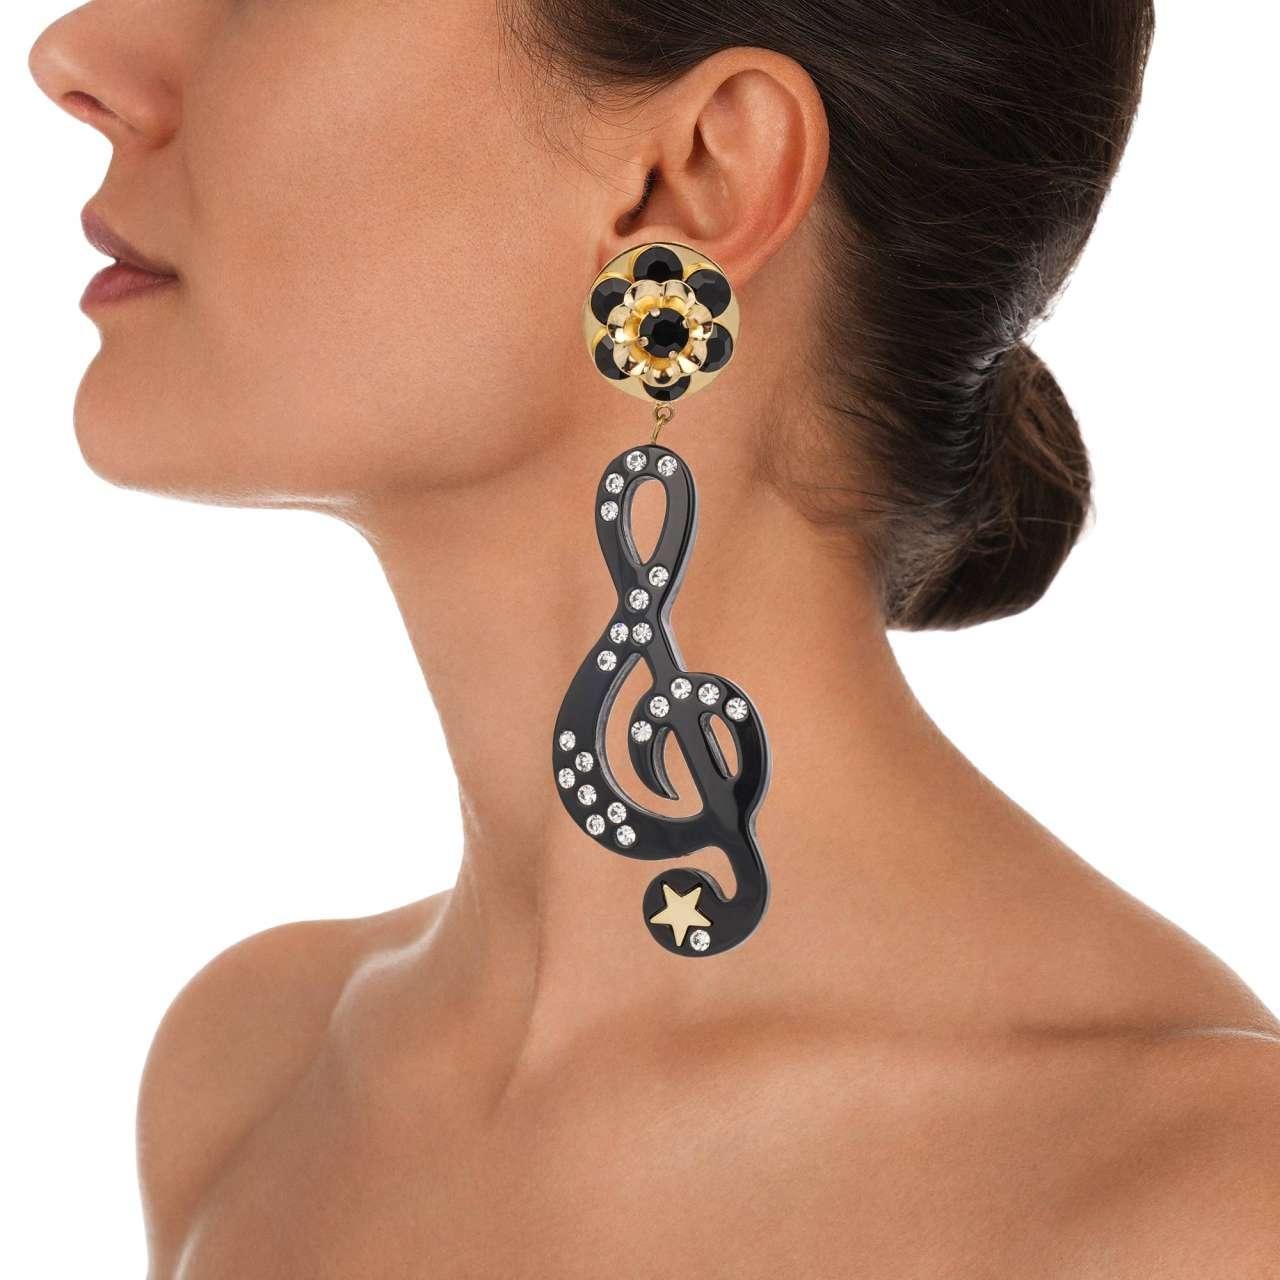 Dolce & Gabbana - Stelle Star Treble Clef Crystal Earrings Gold Black In Excellent Condition For Sale In Erkrath, DE